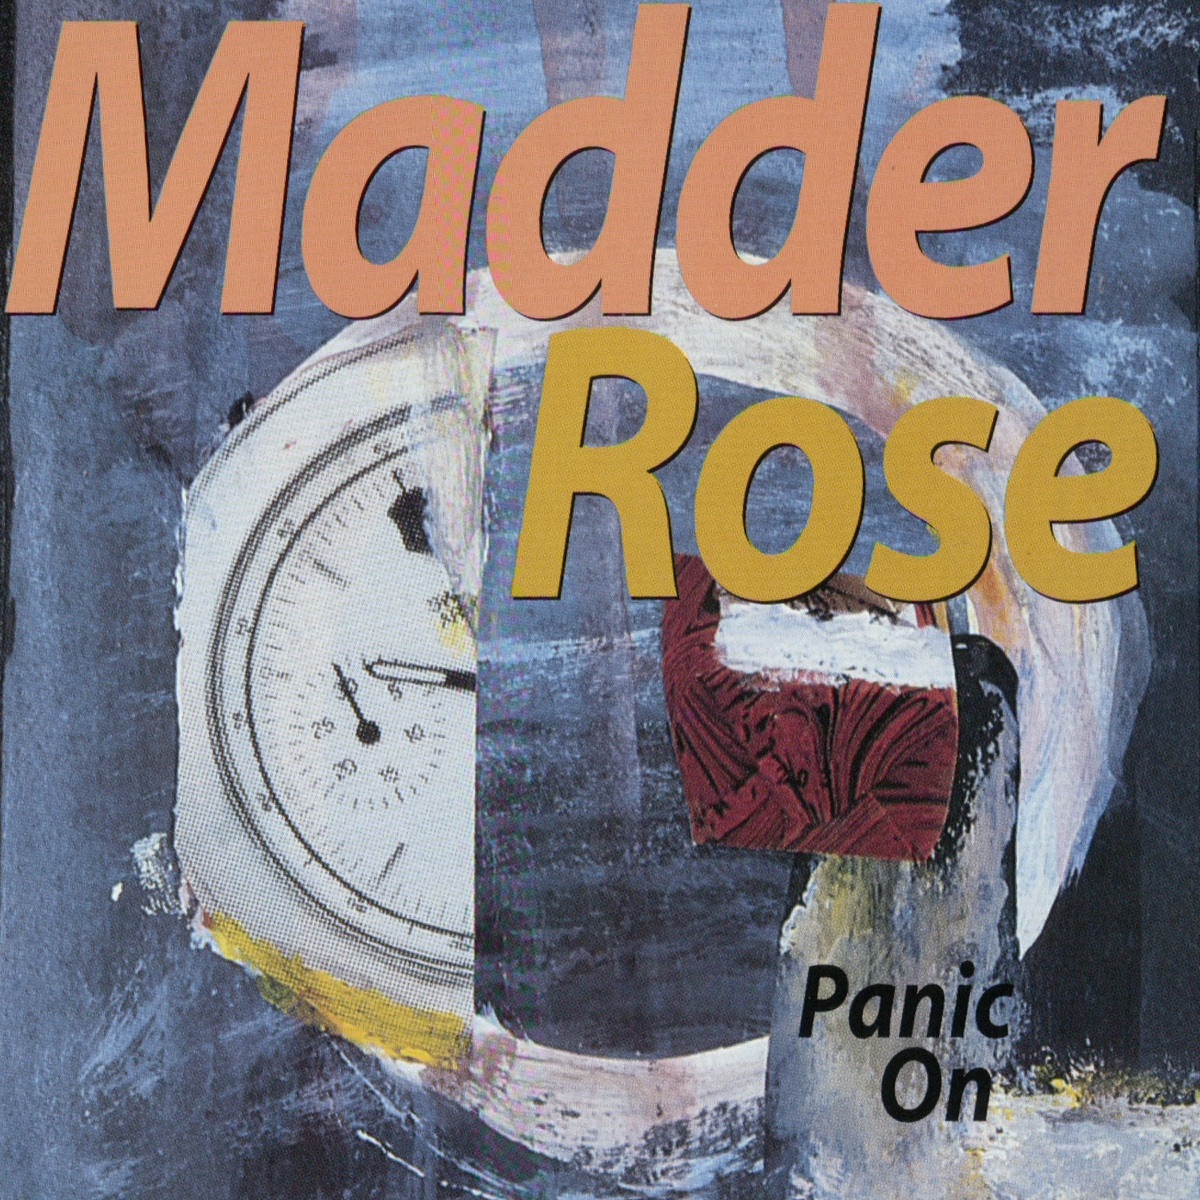 Panic On by Madder Rose on Apple Music